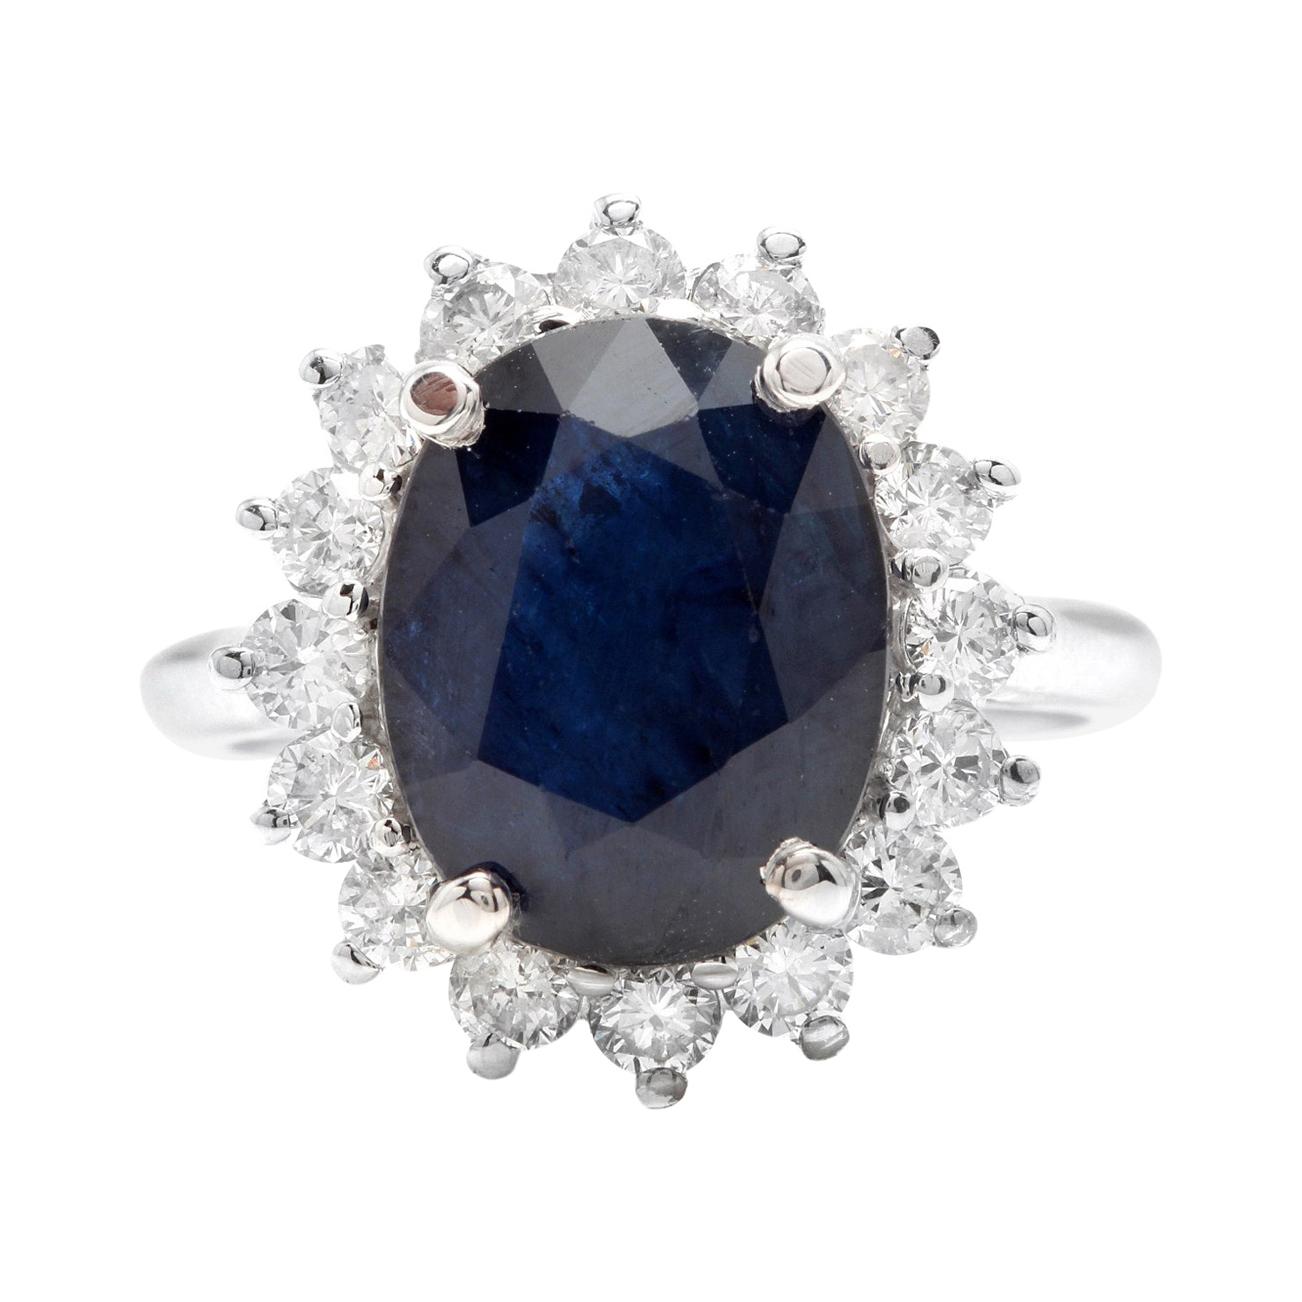 8.15ct Natural Blue Sapphire & Diamond 14k Solid White Gold Ring